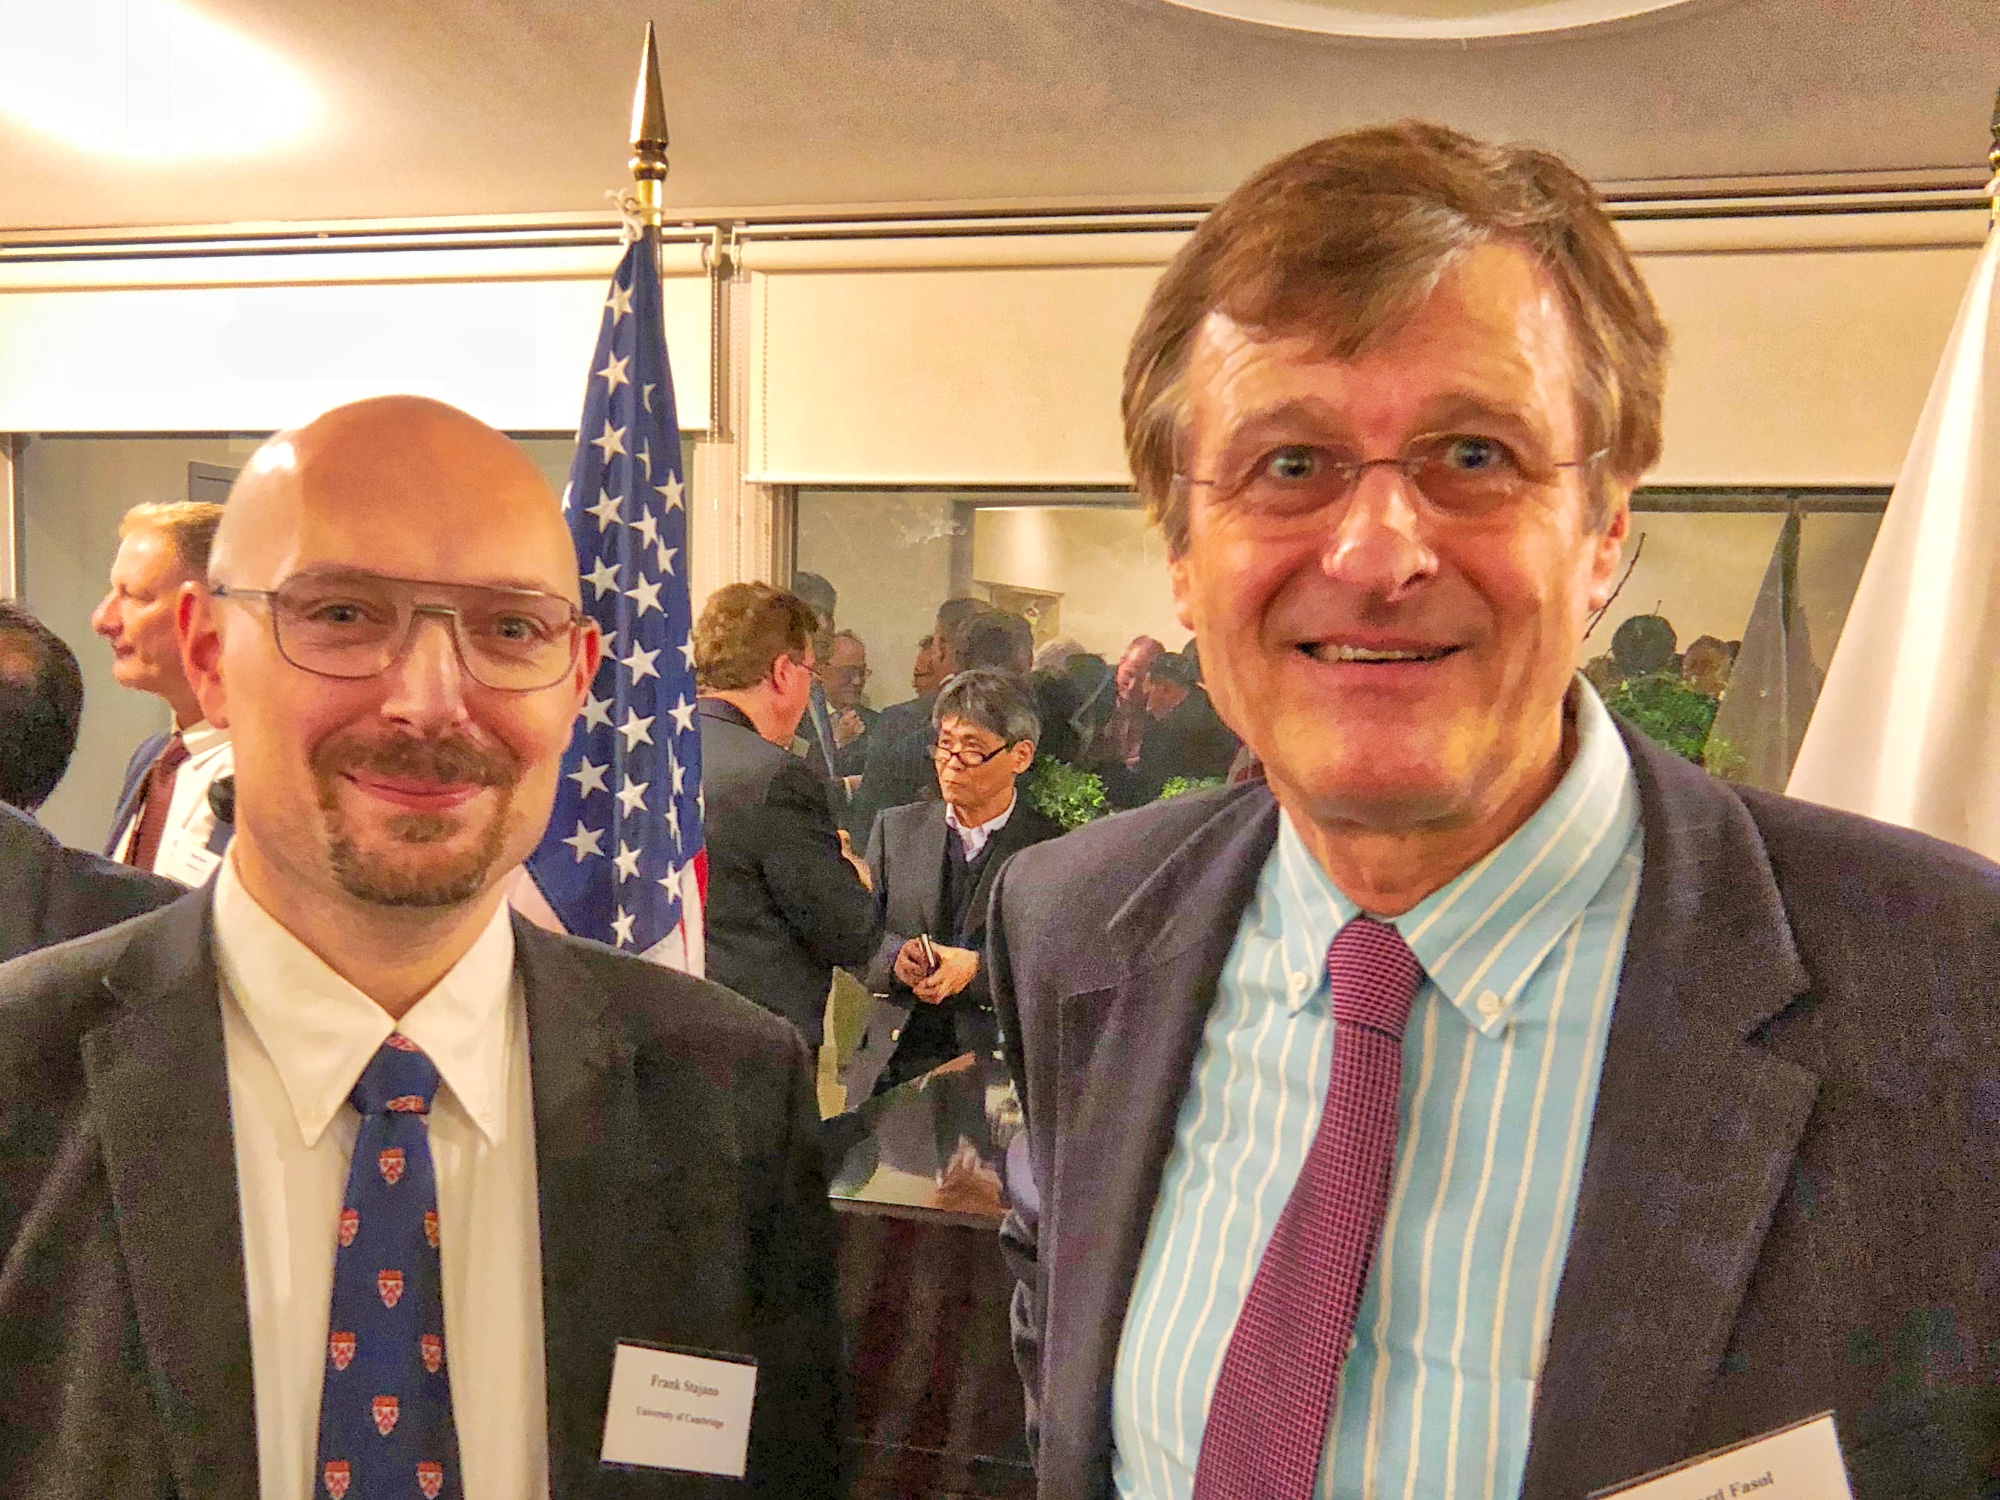 Professor Frank Stajano, Trinity Fellow, and Gerhard Fasol at the cyber security conference in Tokyo on 28 March 2018